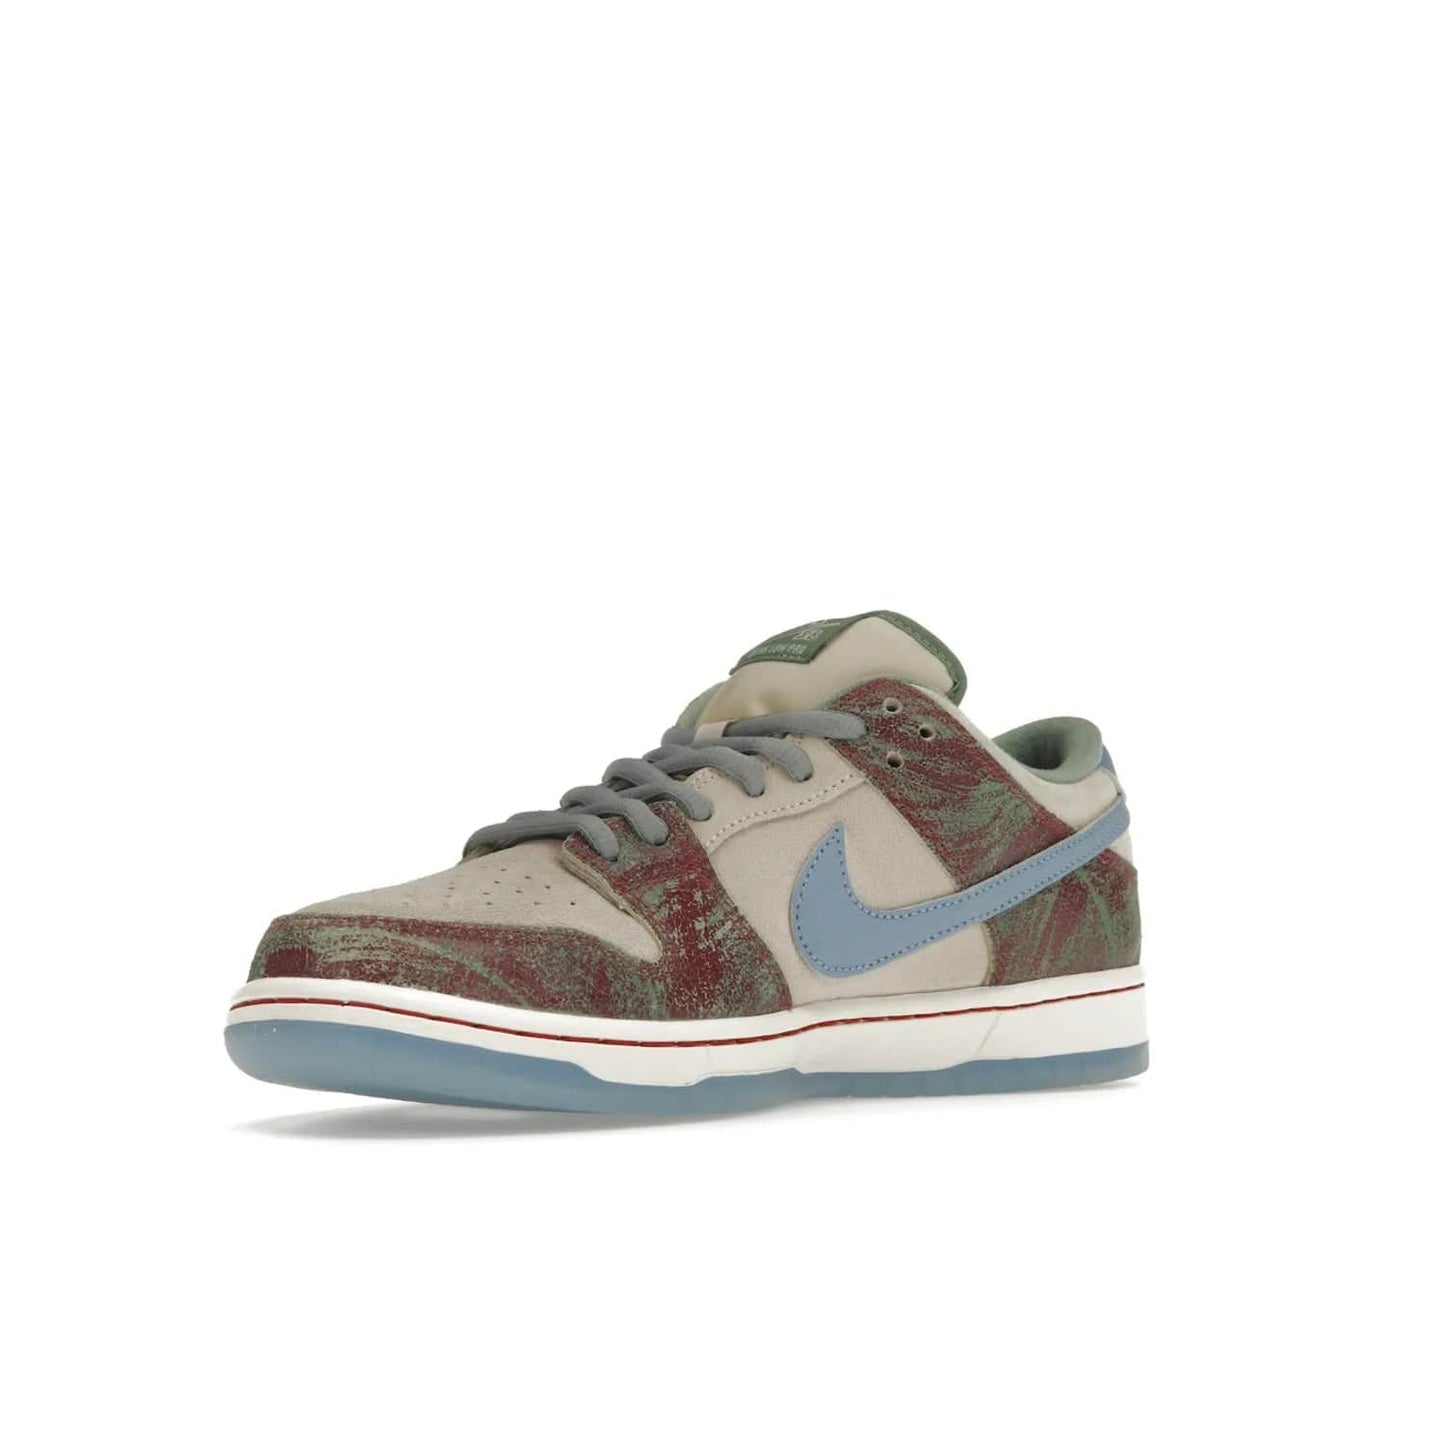 Nike SB Dunk Low Crenshaw Skate Club - Image 15 - Only at www.BallersClubKickz.com - Introducing the Nike SB Dunk Low Crenshaw Skate Club! Classic skate shoes with Sail and Light Blue upper, Cedar accents, padded collars and superior grip for comfortable, stable performance and style. Ideal for any skate session.